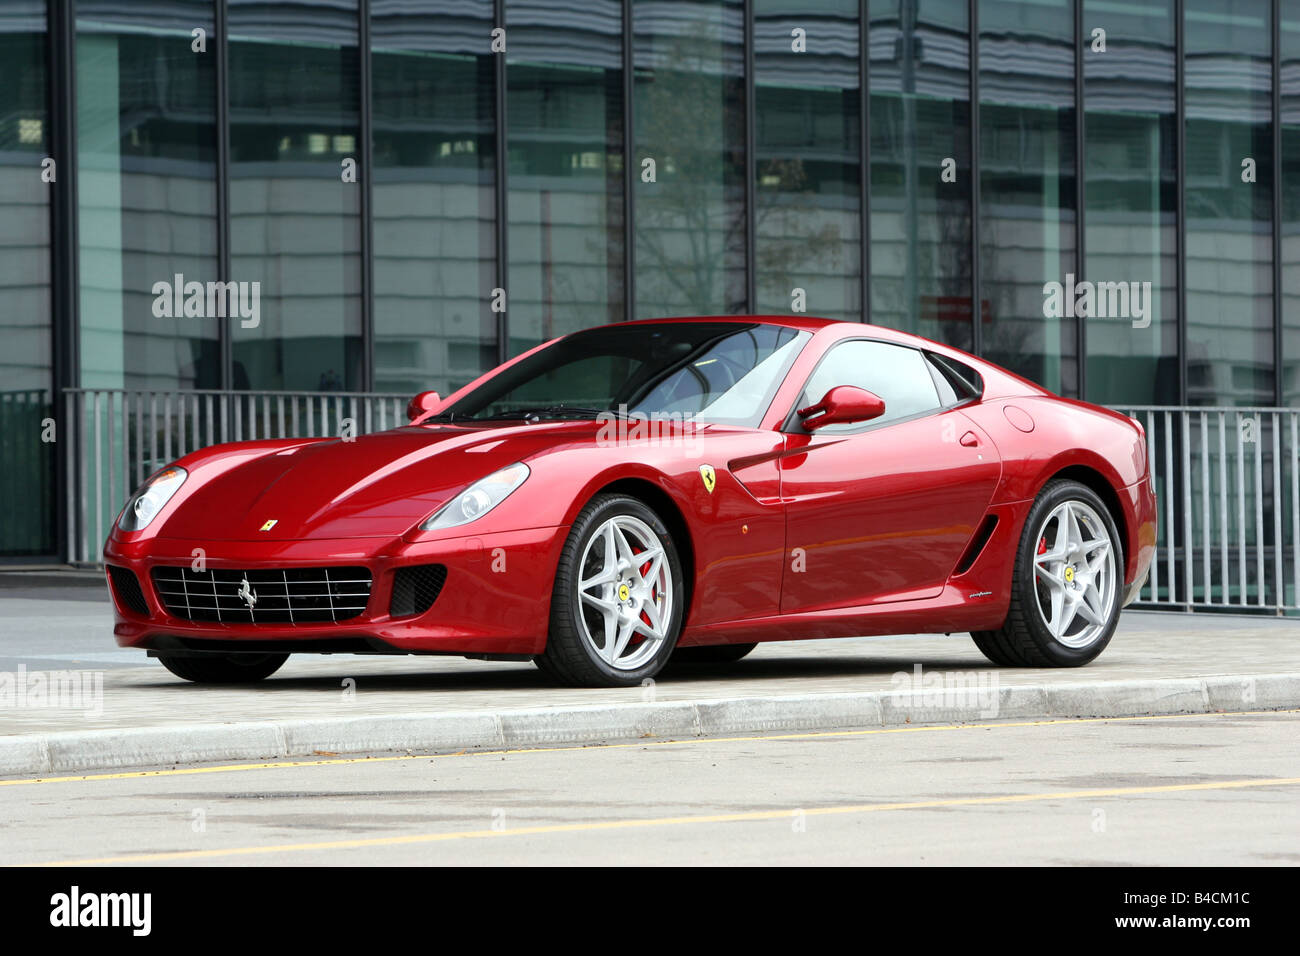 Ferrari 599 GTB Fiorano, red, model year 2006-, standing, upholding, diagonal from the front, frontal view, side view, City Stock Photo